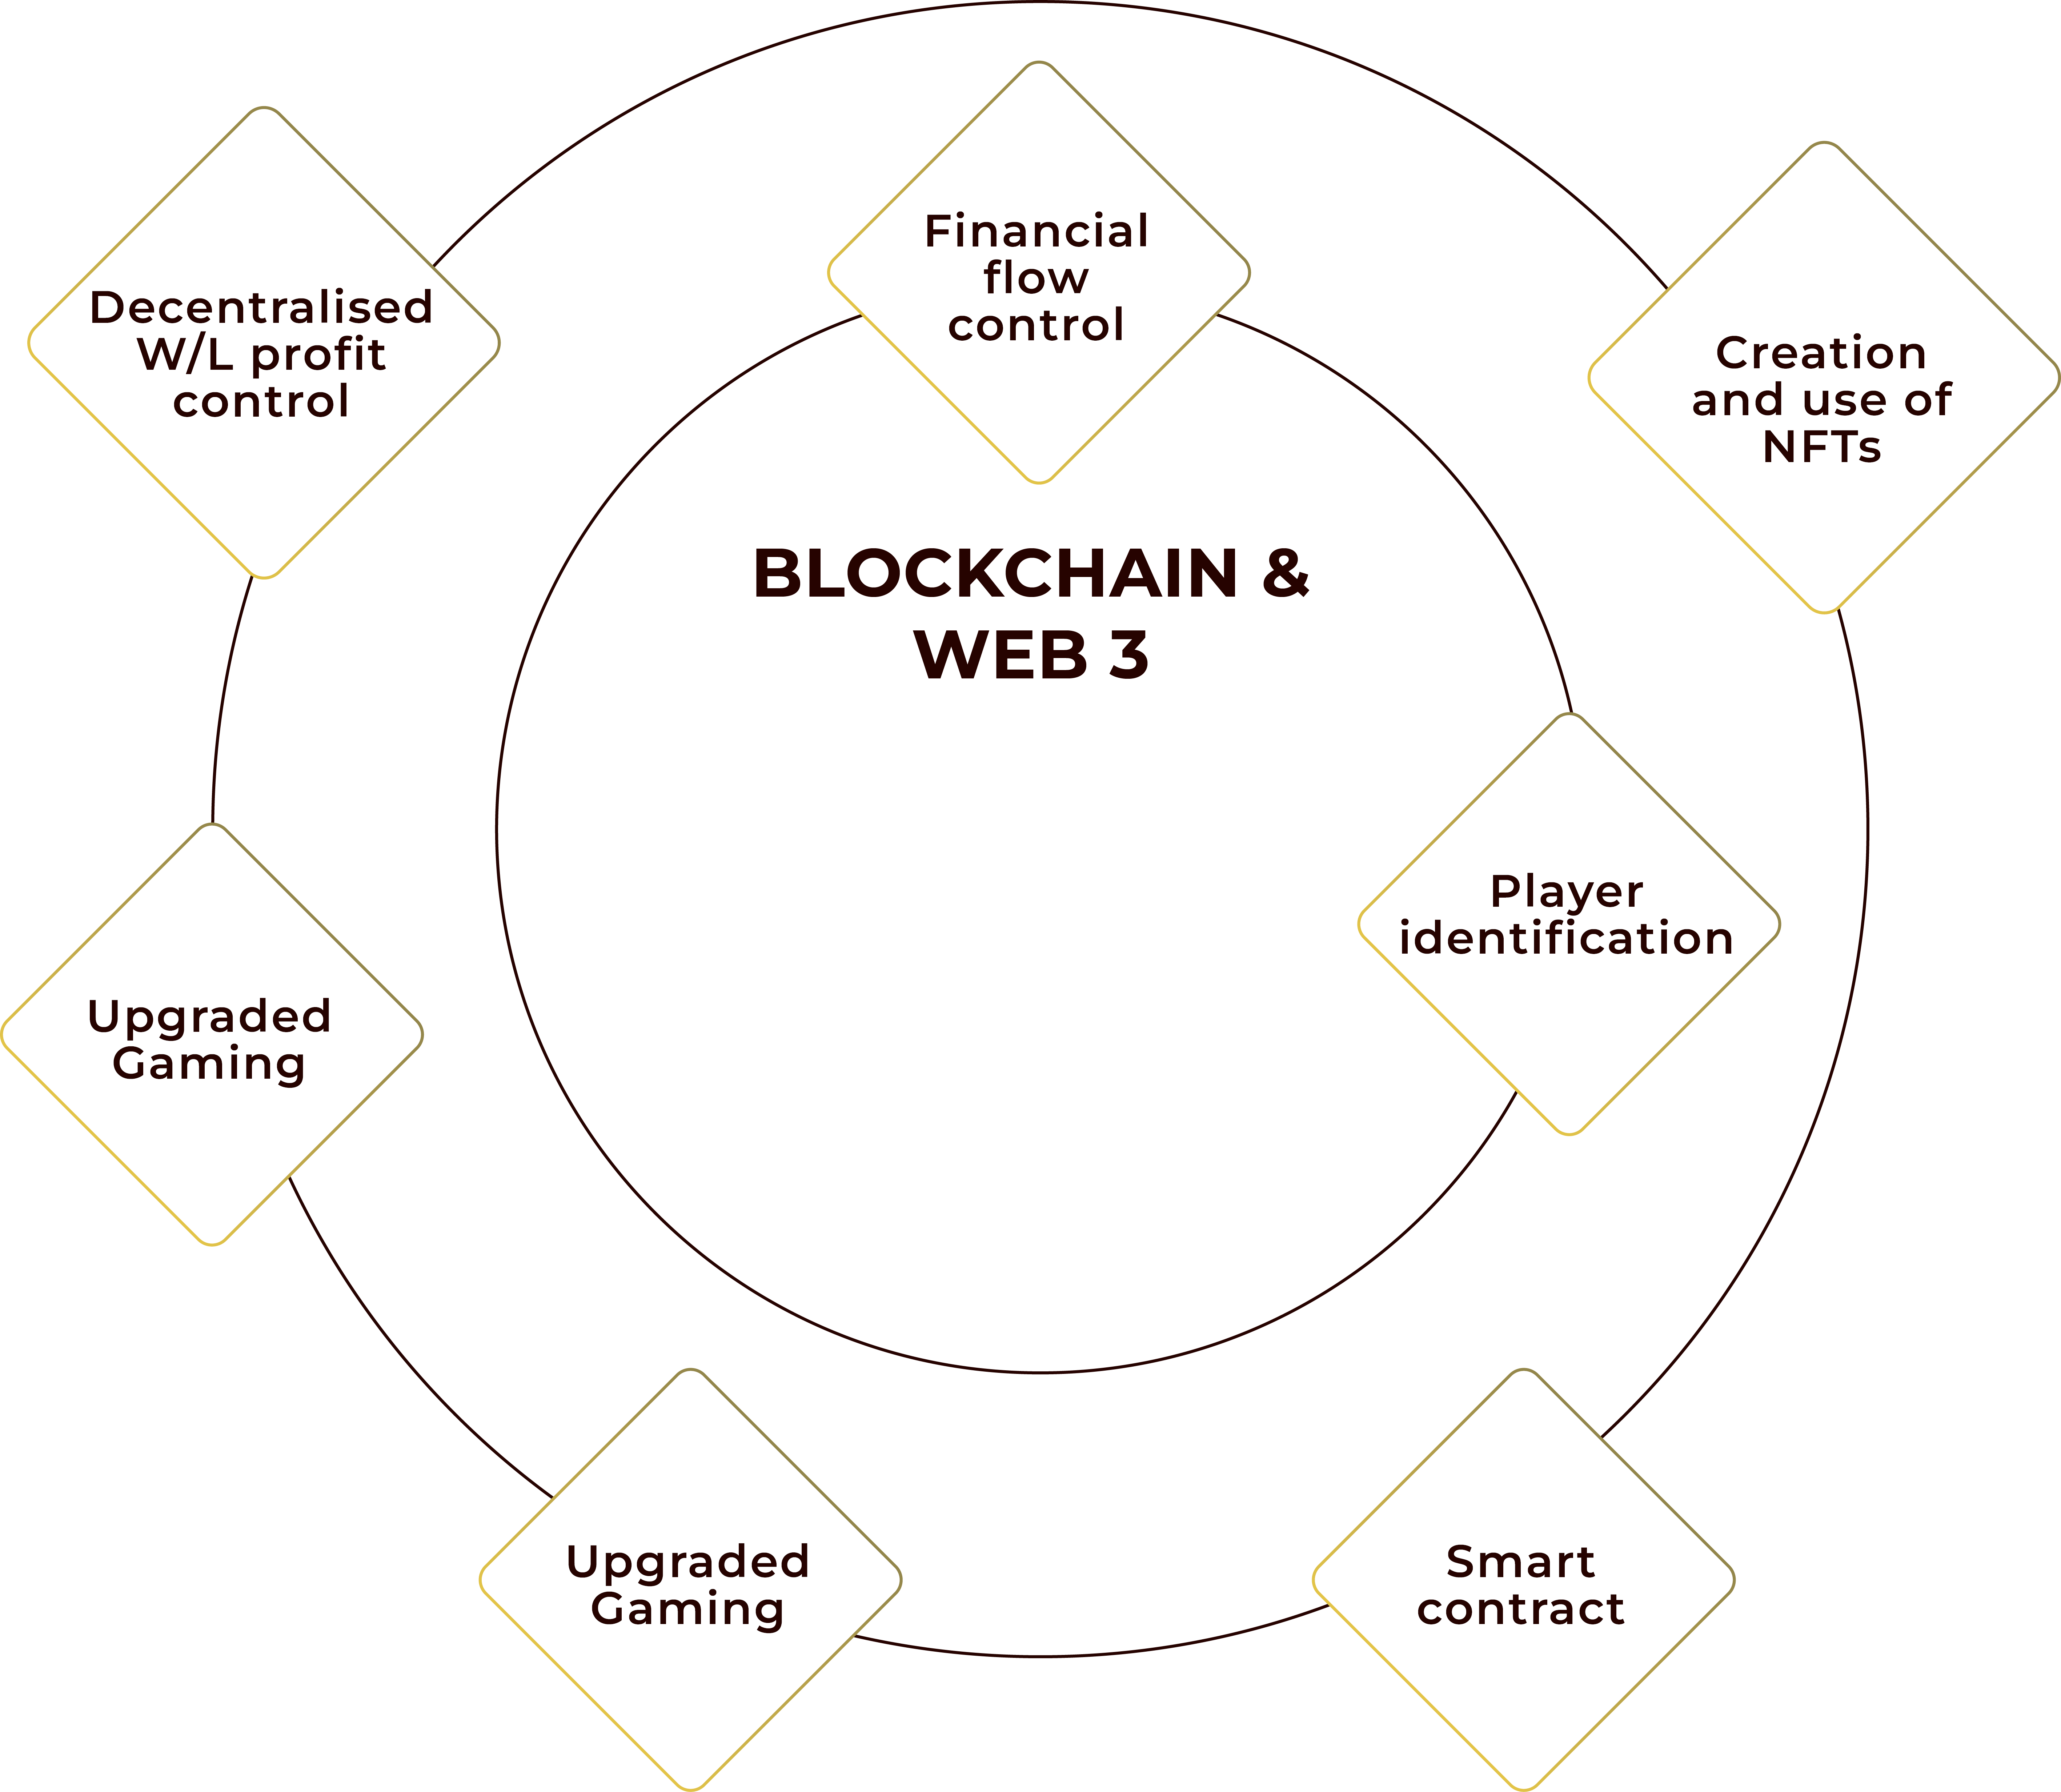 A graph to explain the blockchain and web3 system used : Decentralised W/L profit control, Financial flow control, Creation and use of NFTs, Upgraded Gaming, Player identification, Smart contract